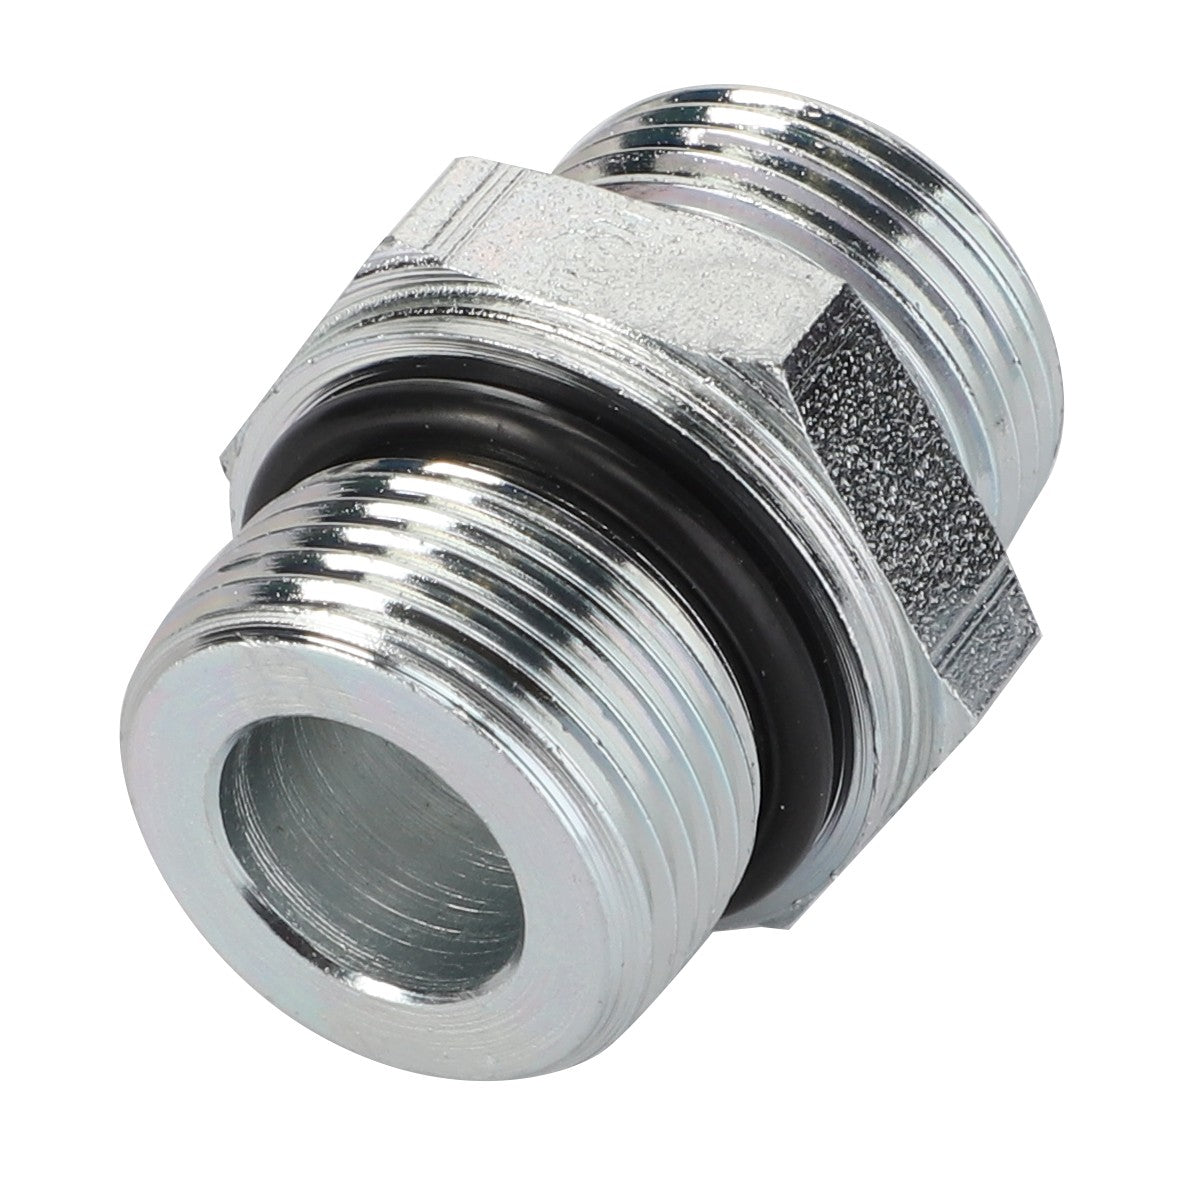 AGCO | Connector Fitting - Acw4998340 - Farming Parts